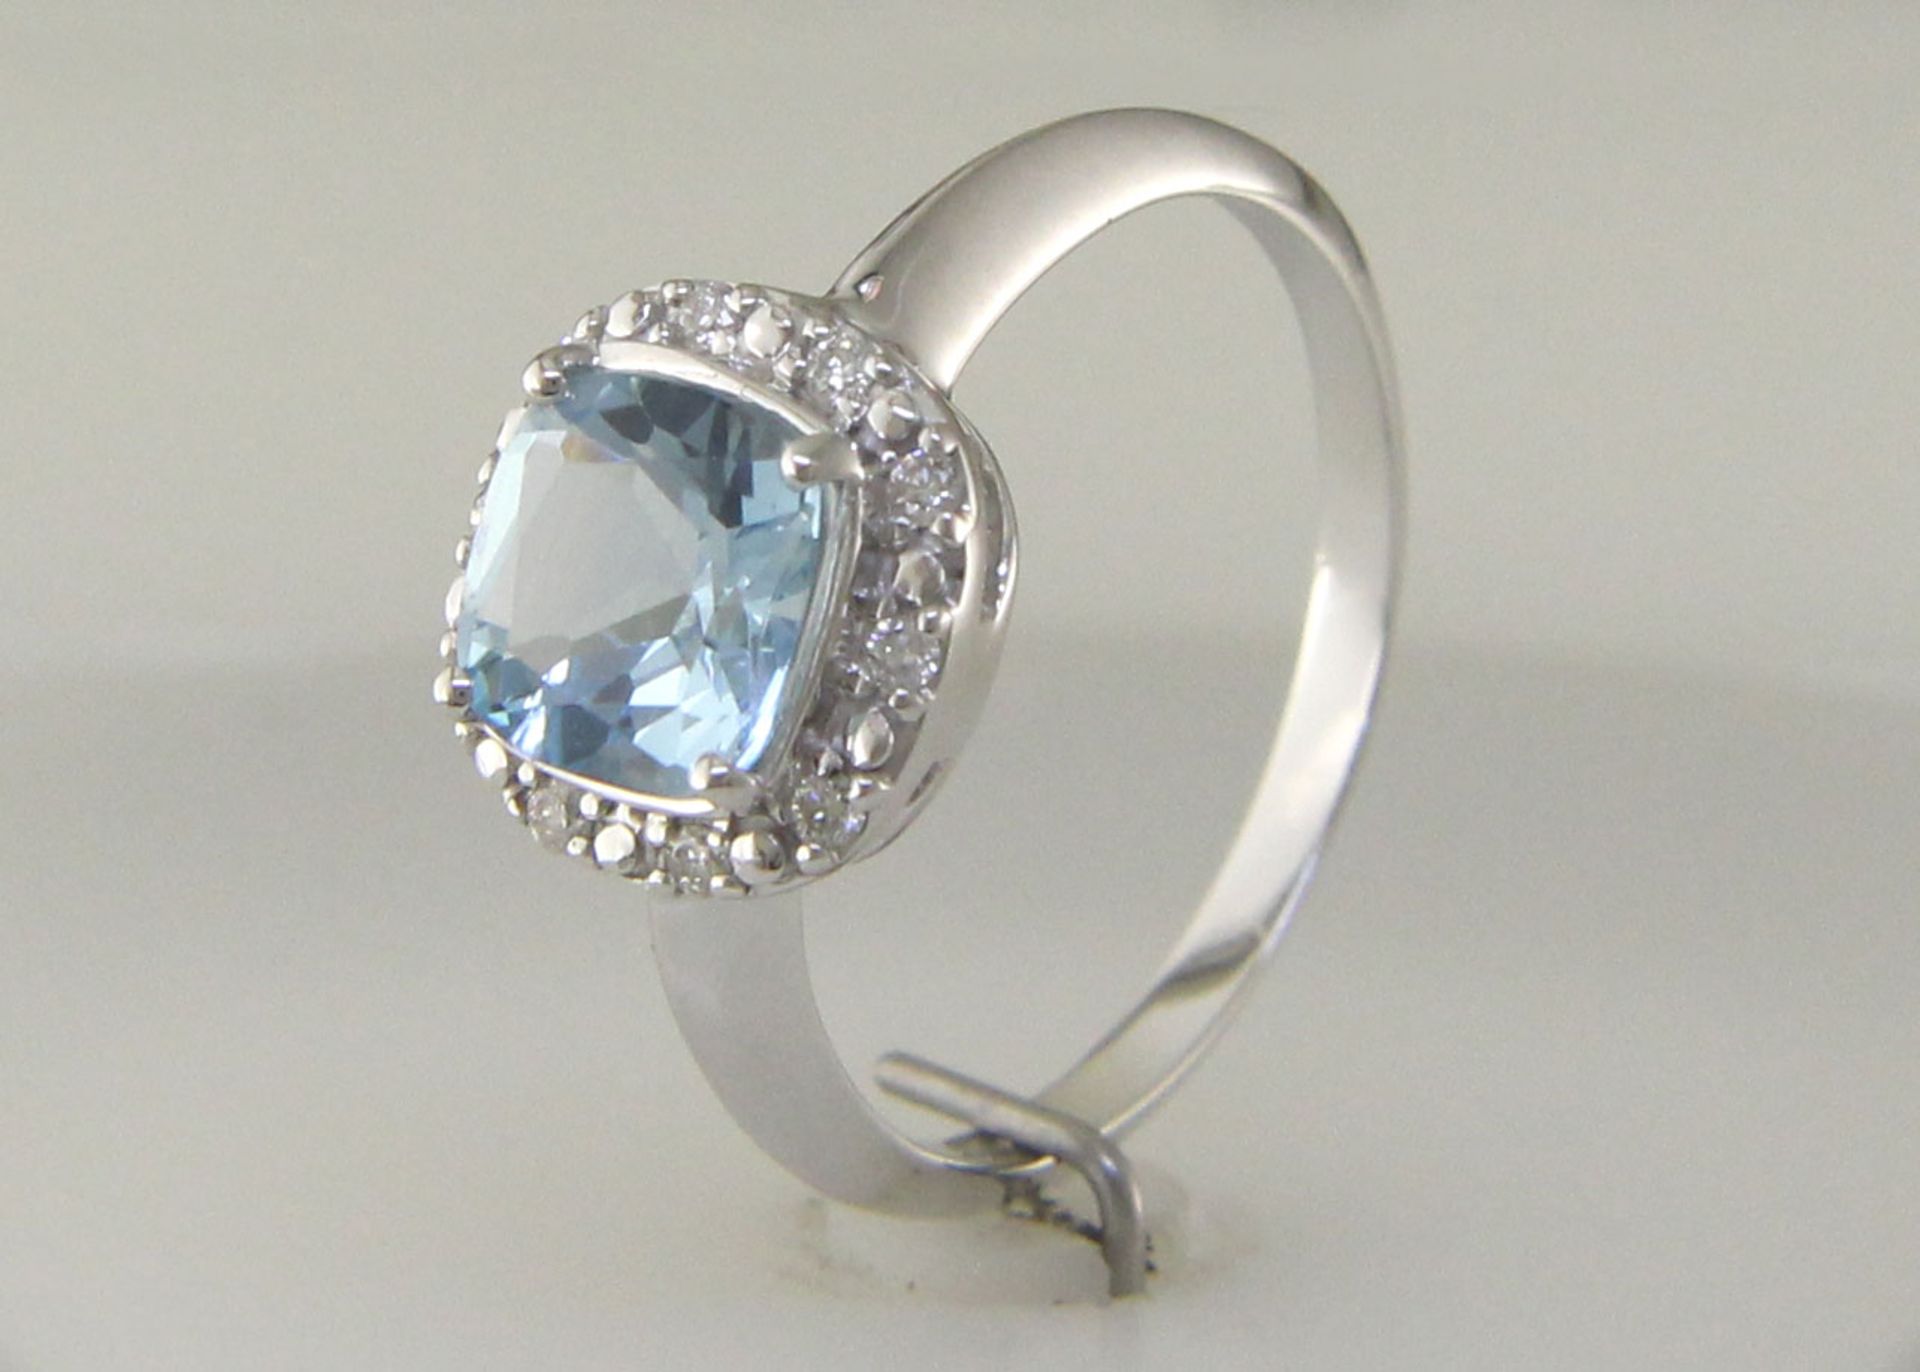 9ct White Gold Diamond And Blue Topaz Ring 0.10 Carats - Valued by GIE £1,920.00 - A stunning - Image 7 of 9